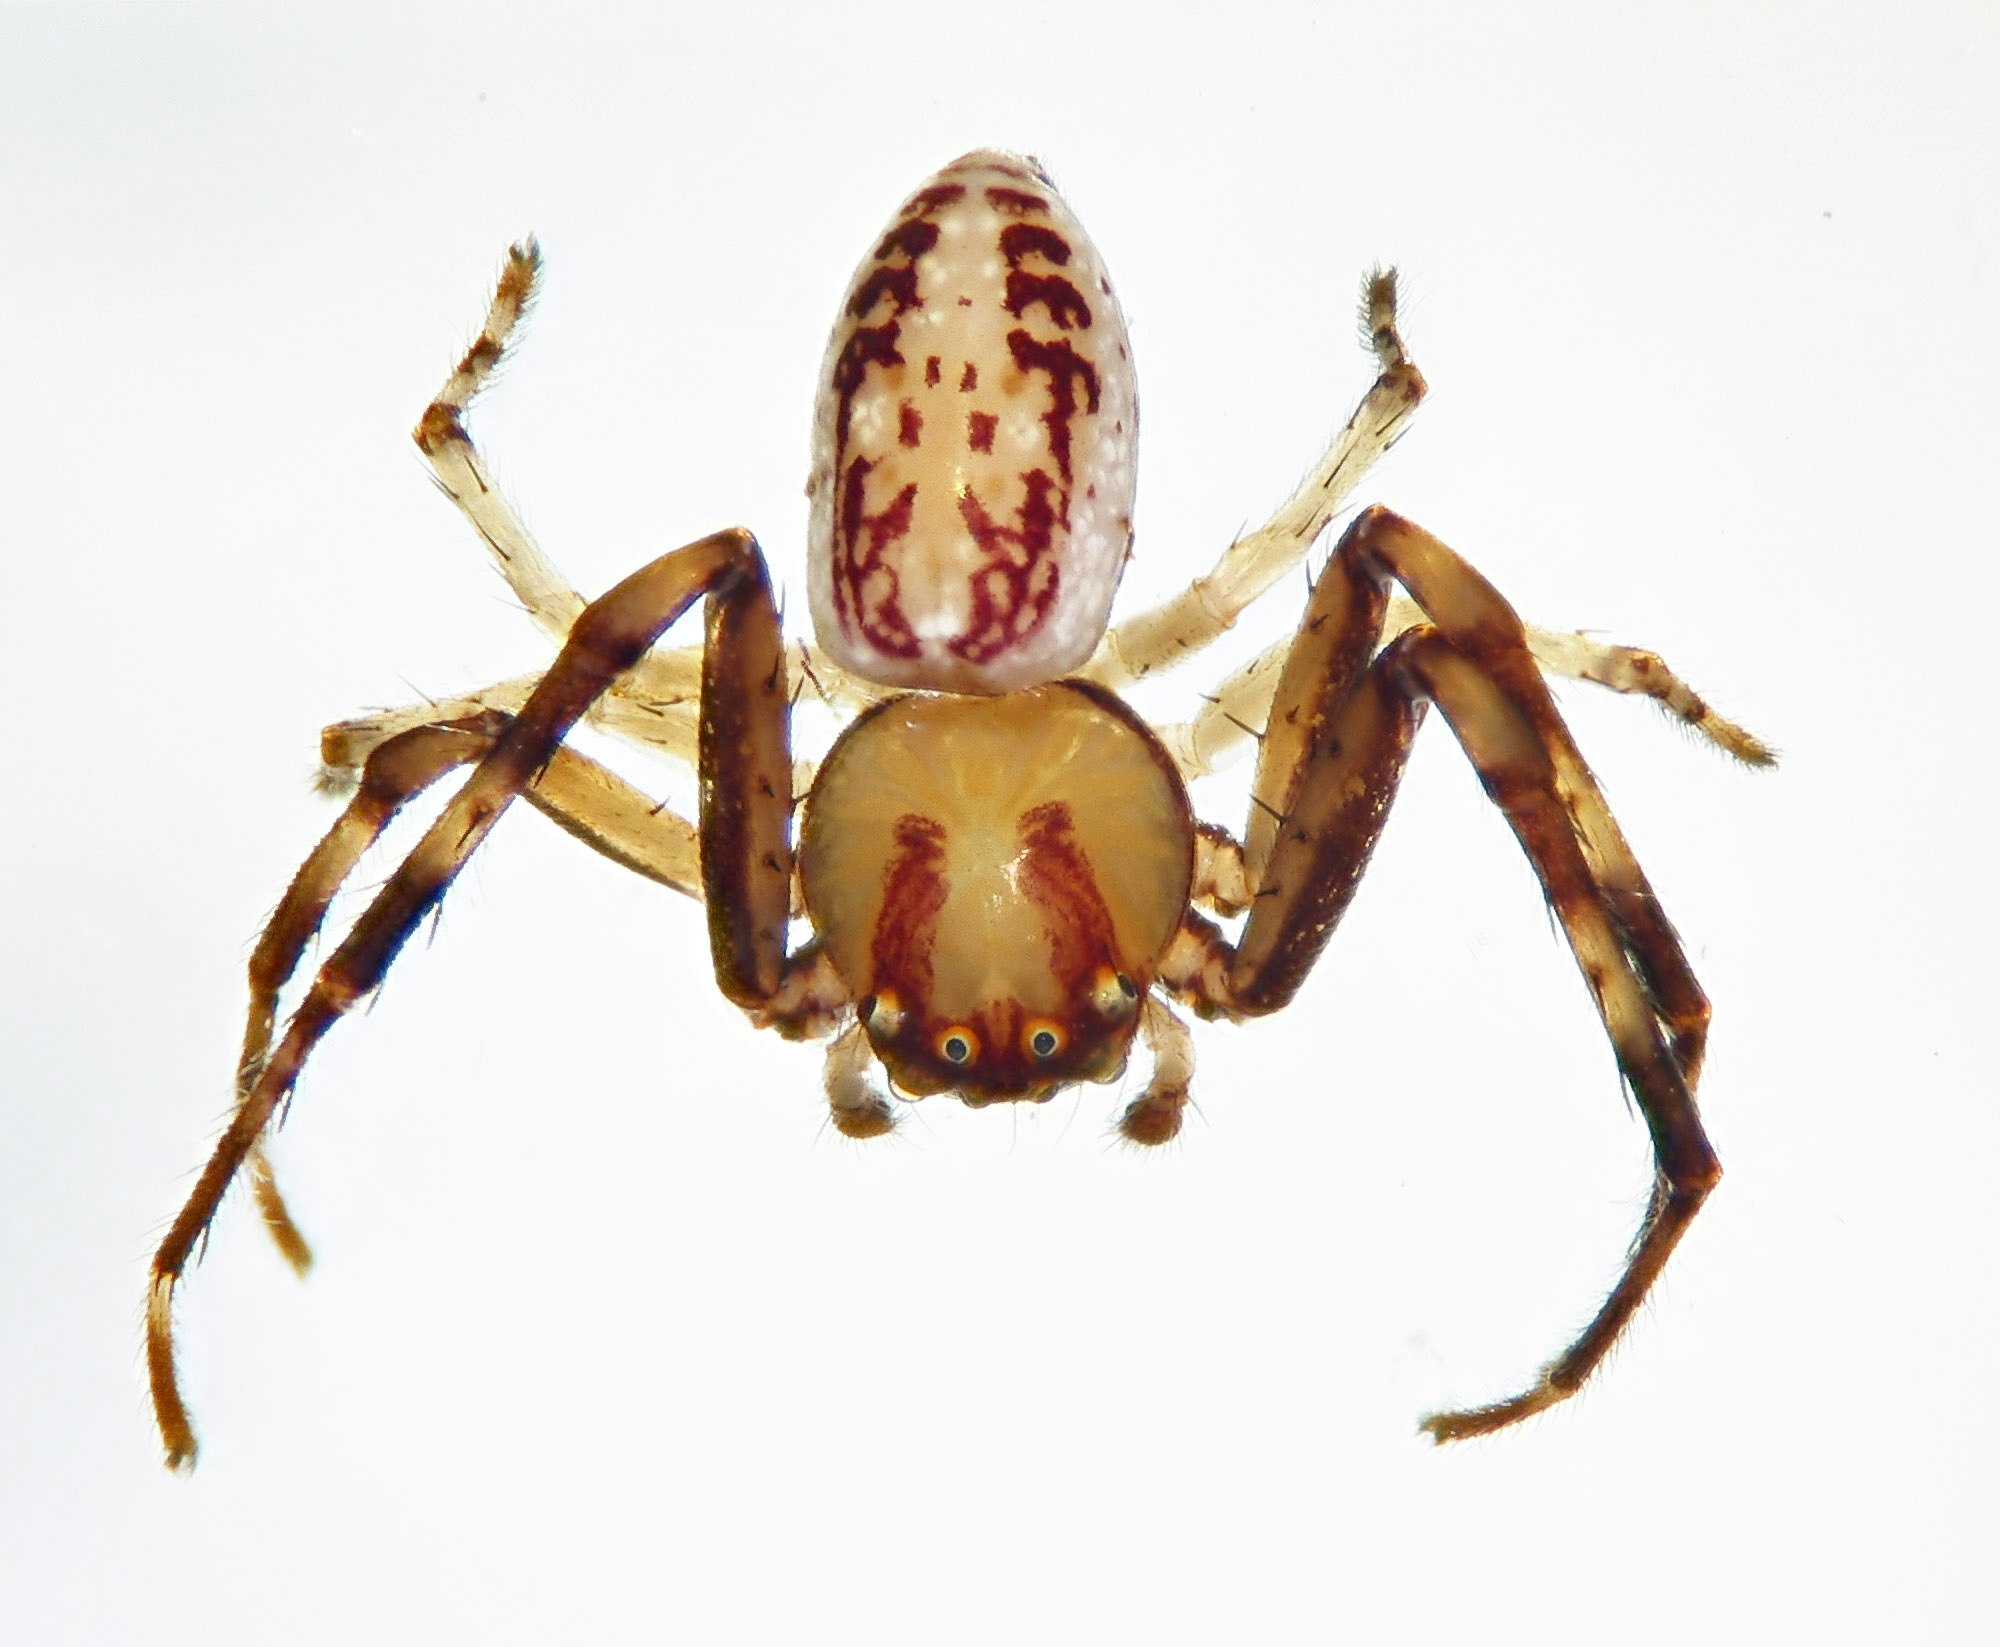 A close shot of a brown spider on a white background